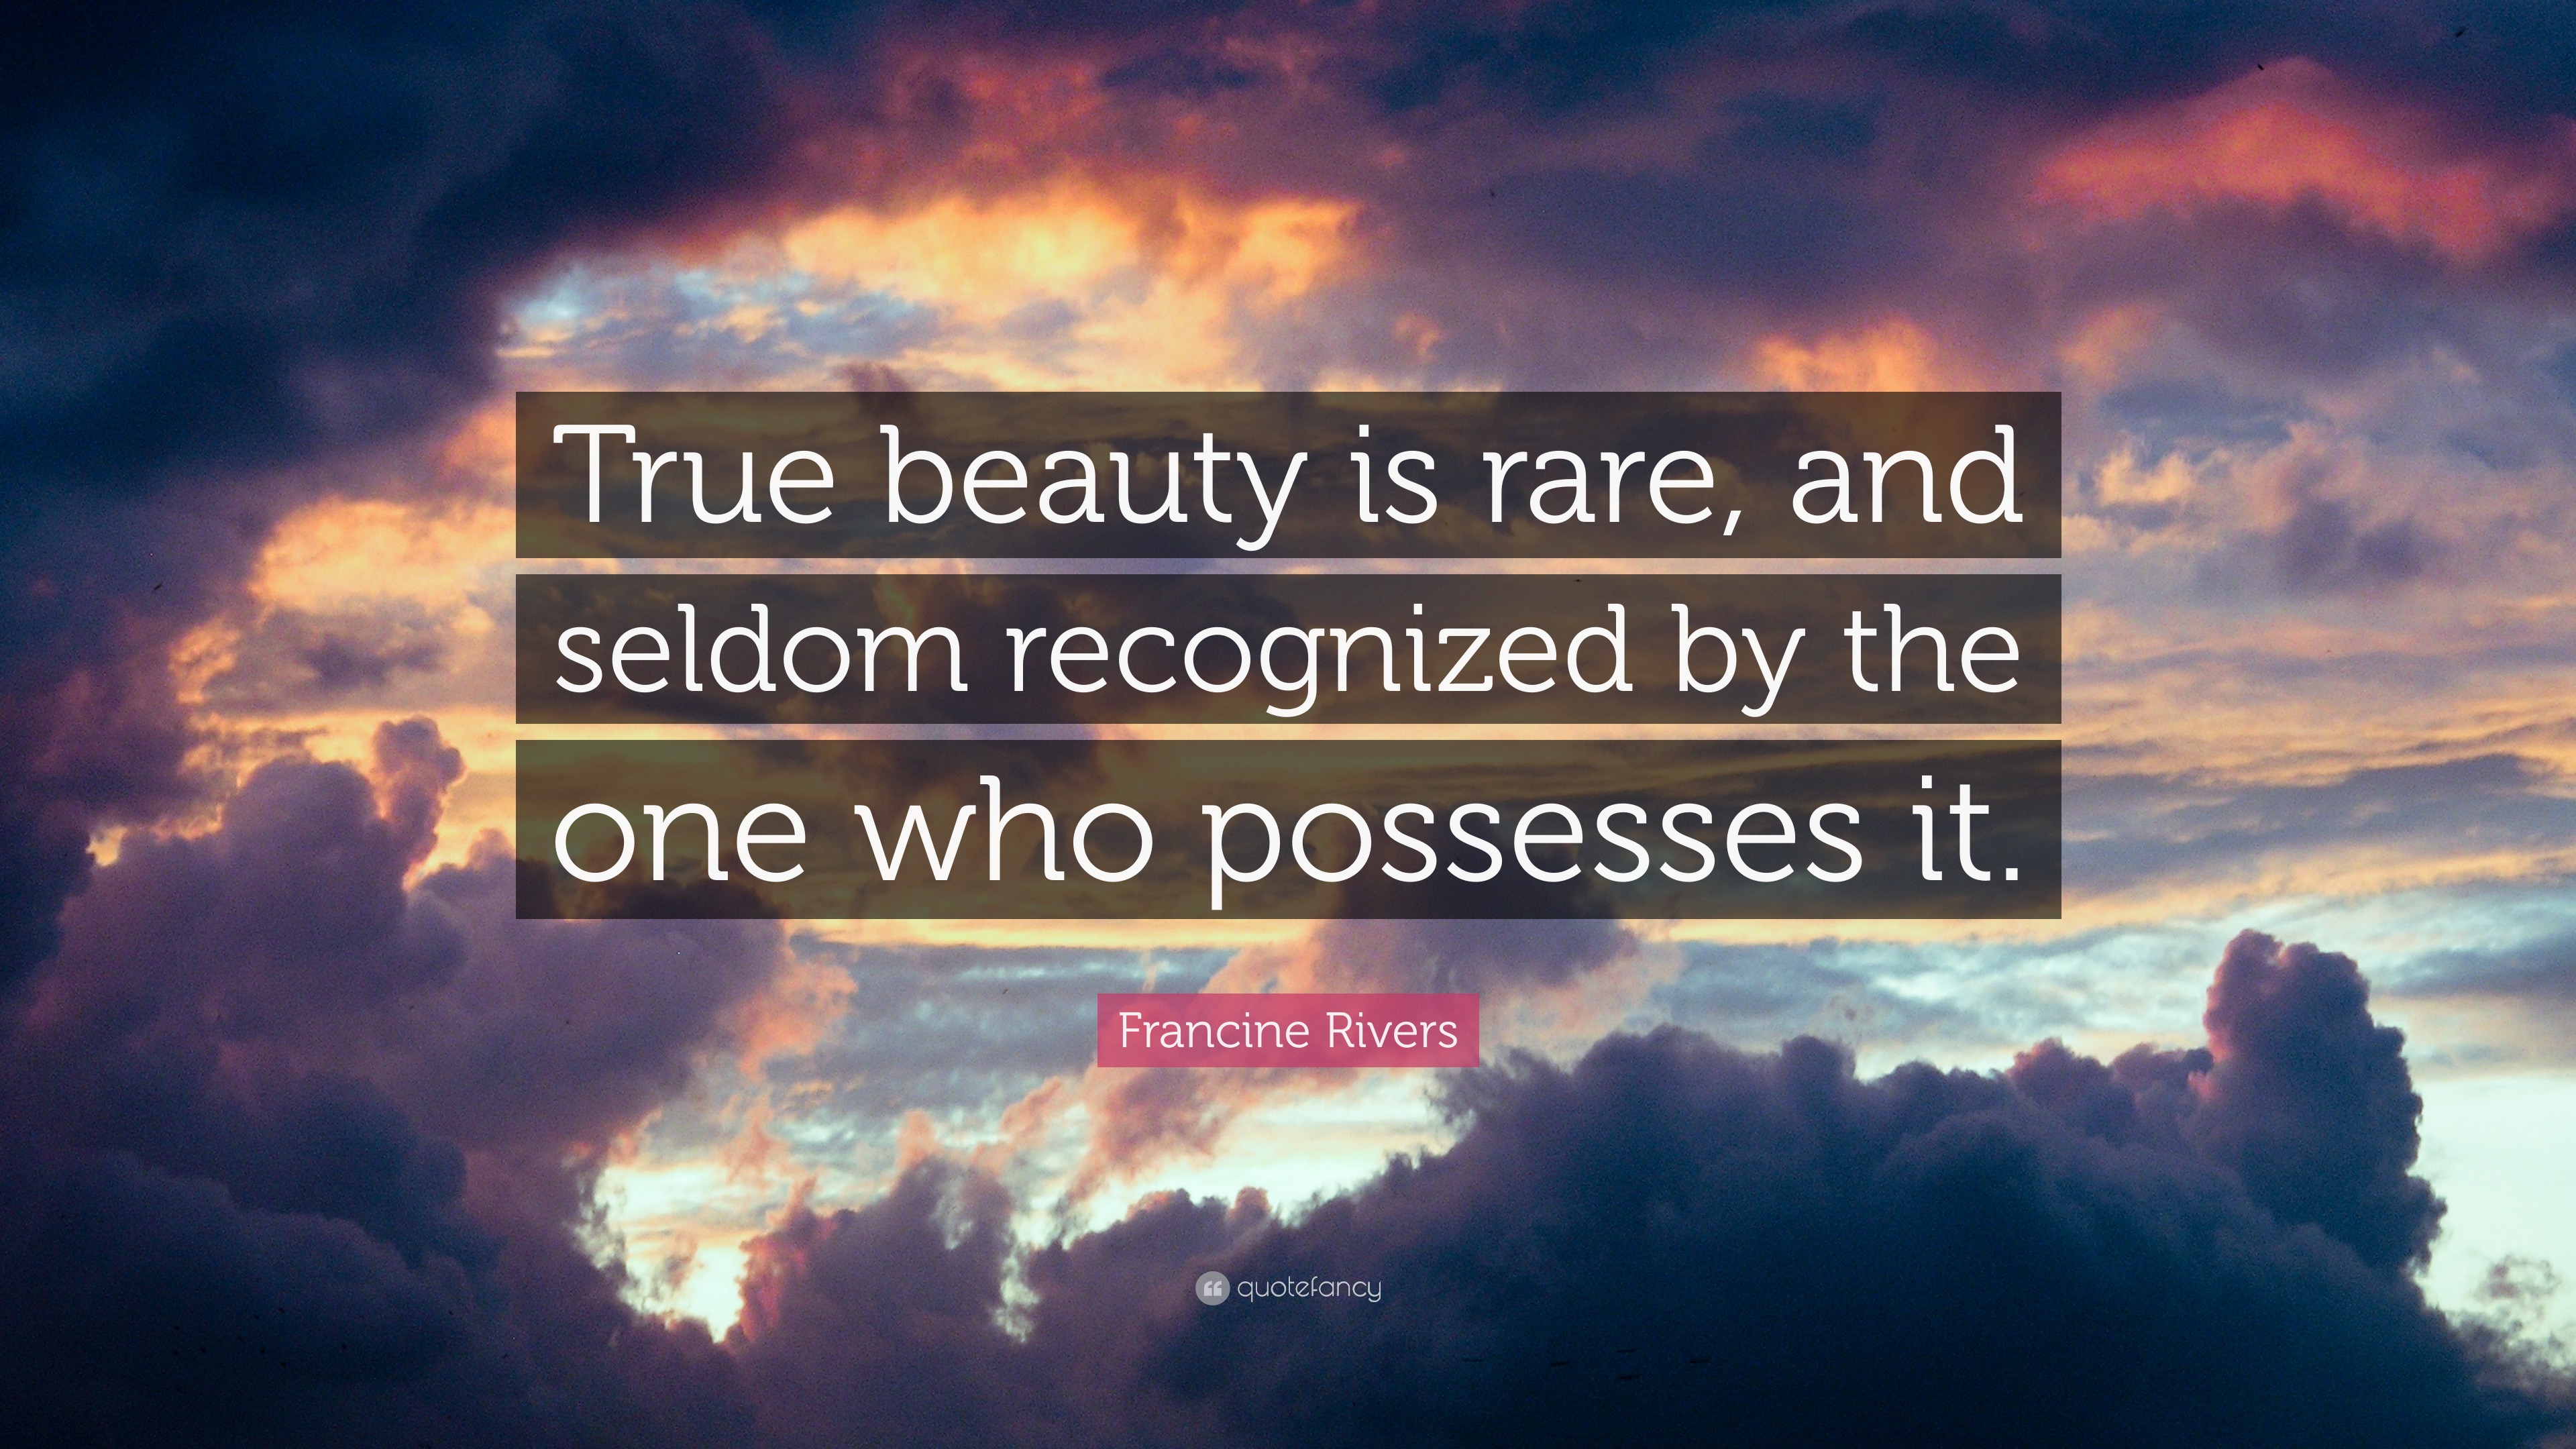 Francine Rivers Quote “true Beauty Is Rare And Seldom Recognized By